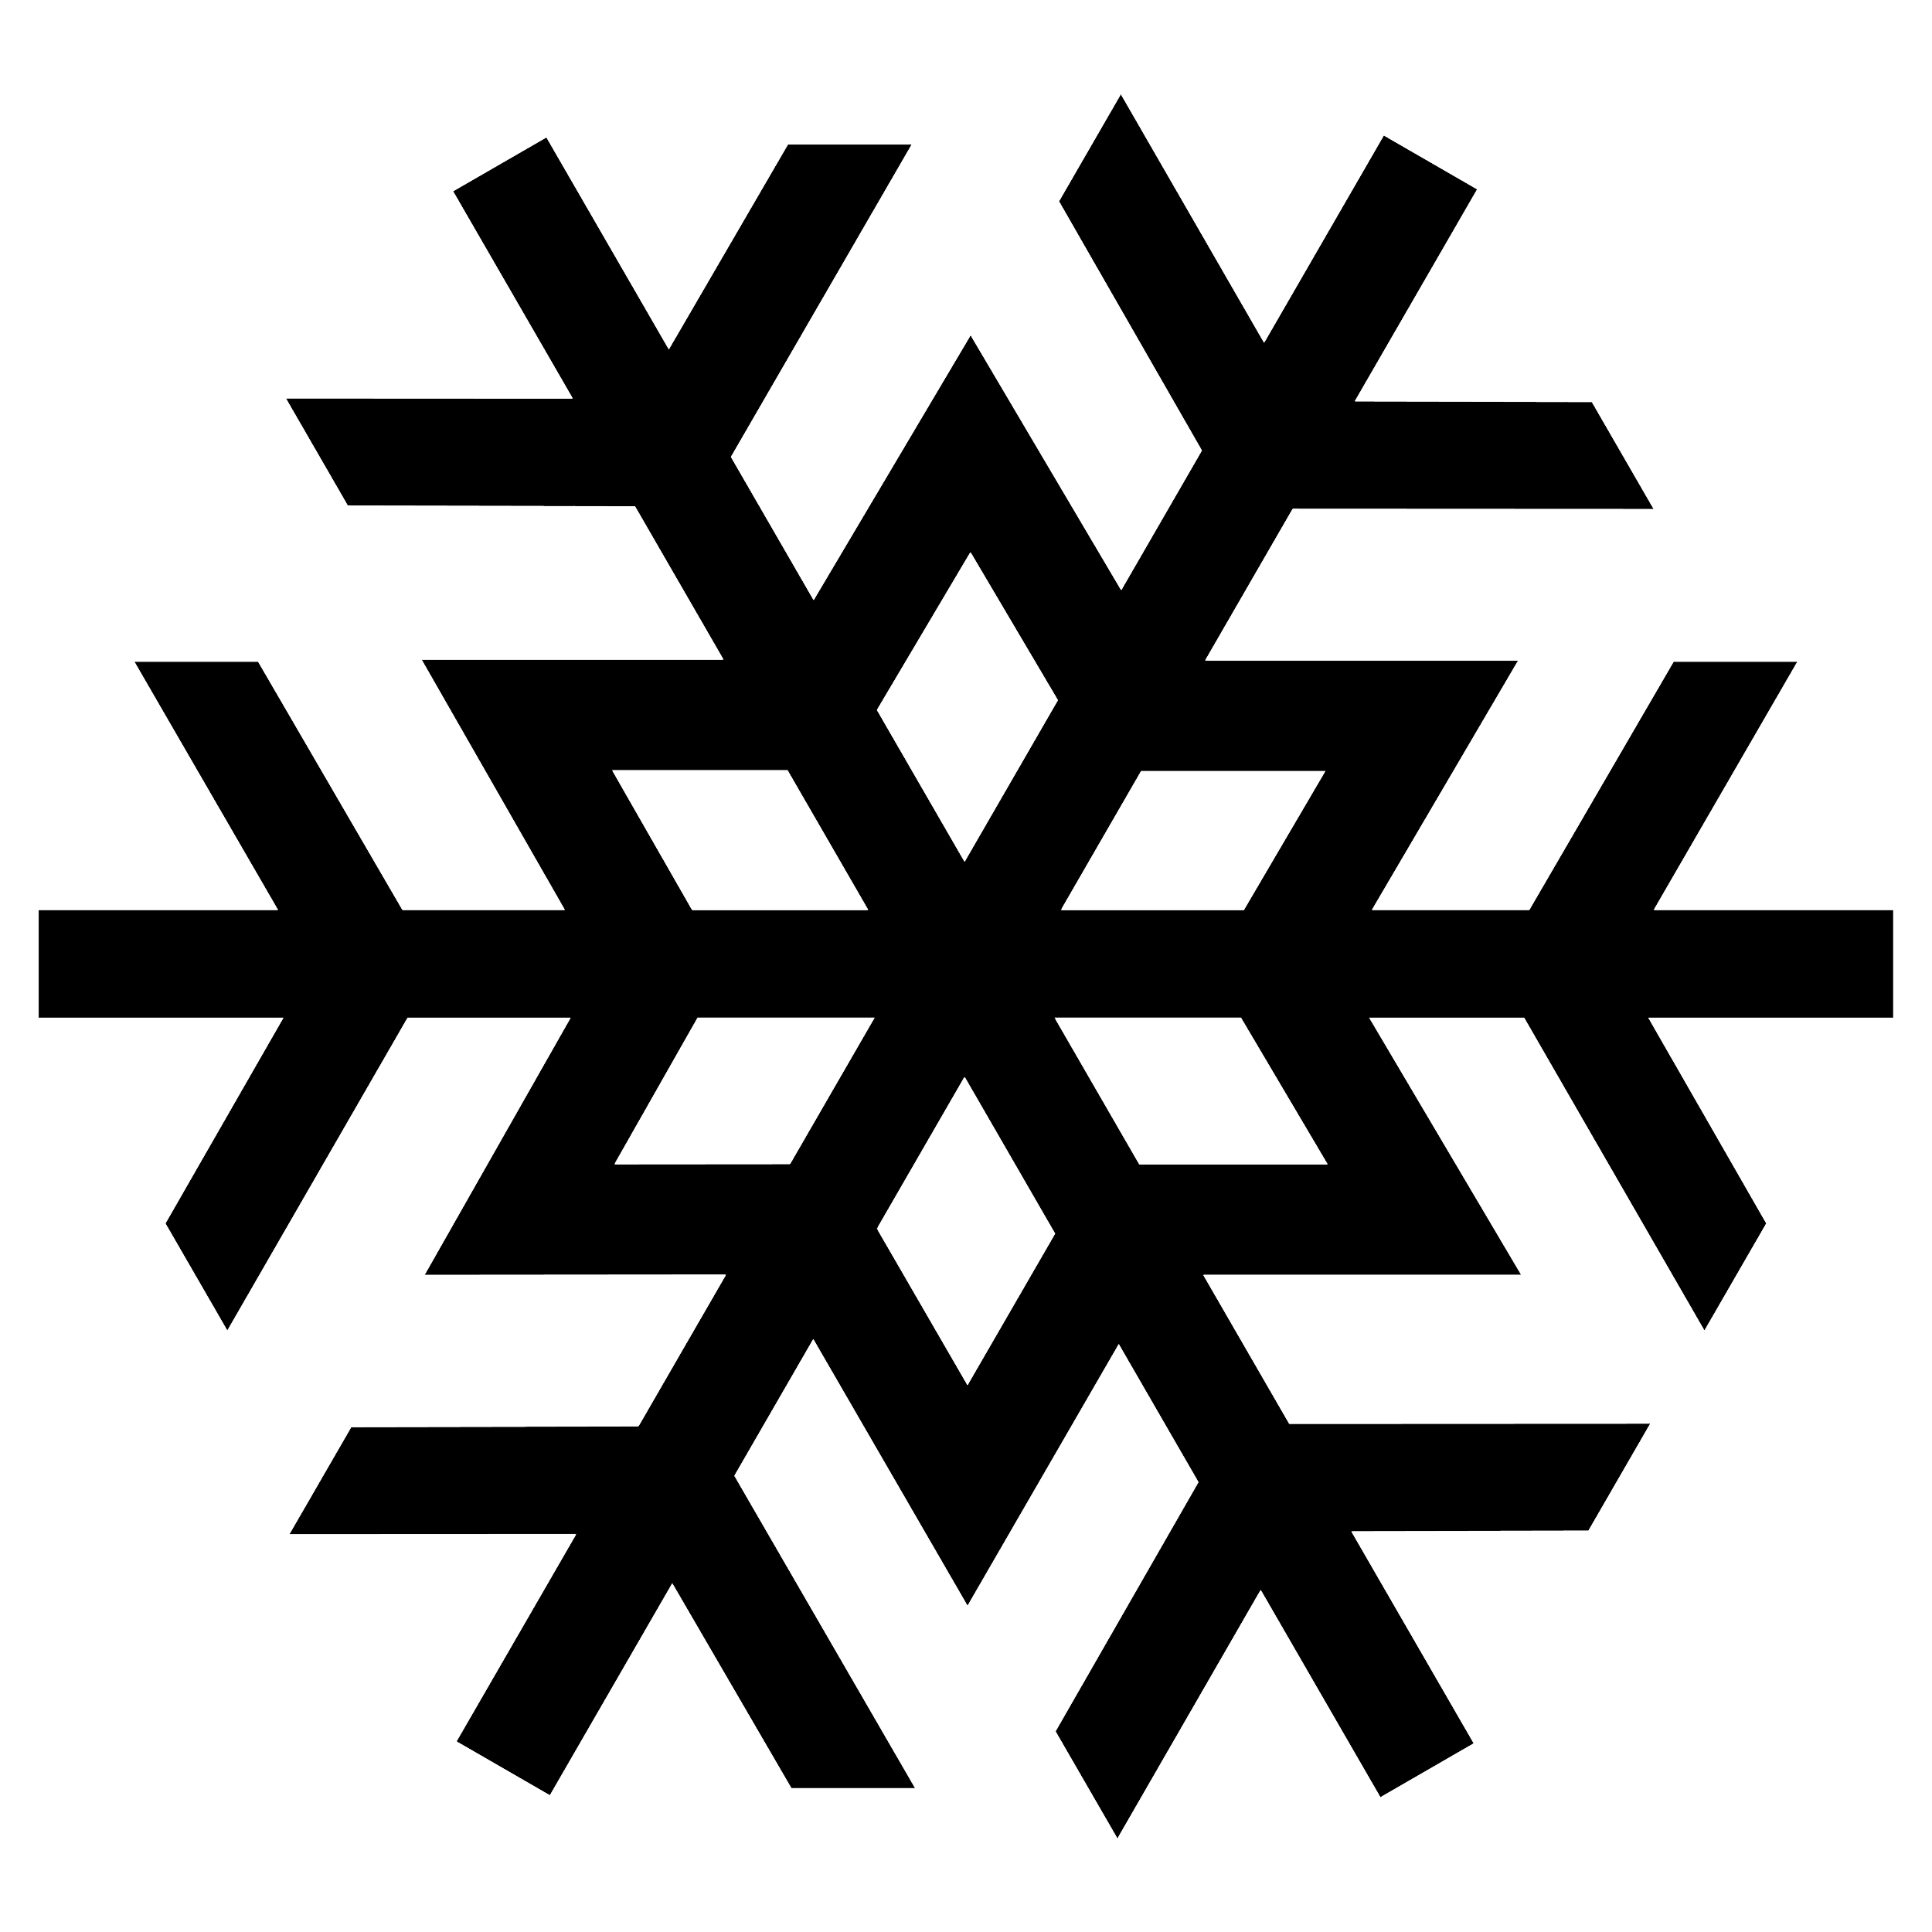 Snowflake silhouette PNG image